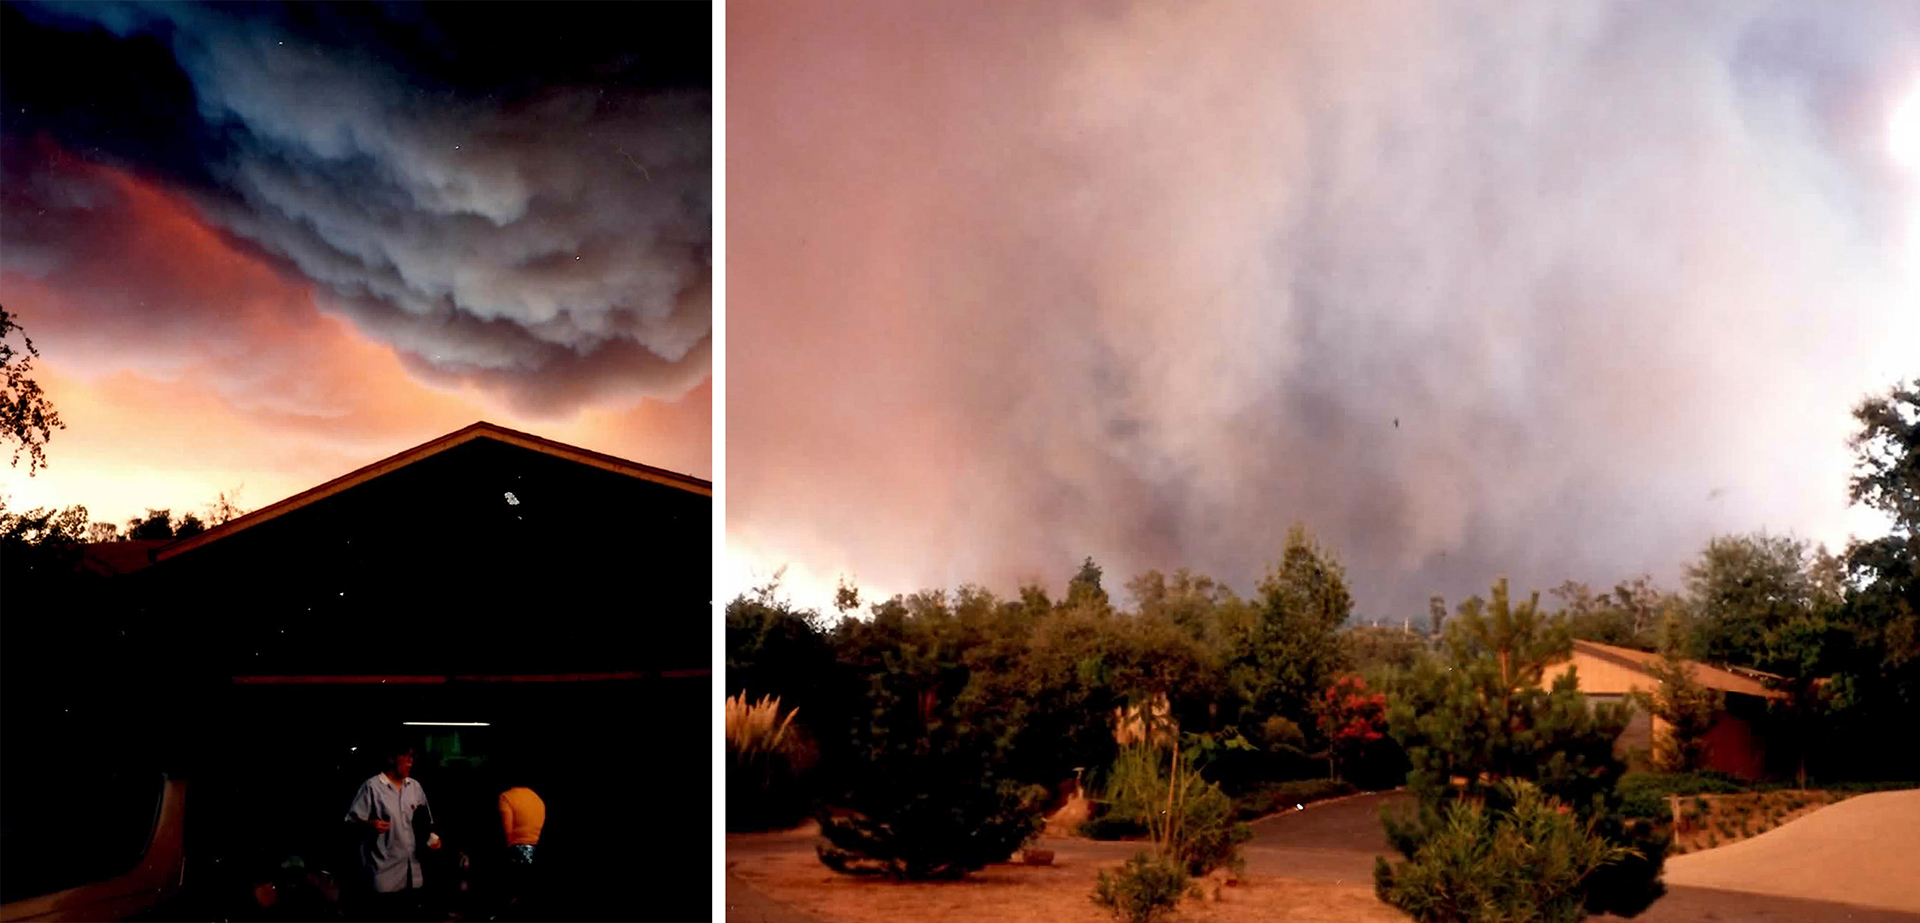 Left: Dark smoke billows above a structure. Right: Light gray and reddish smoke rises above a home surrounded by trees.